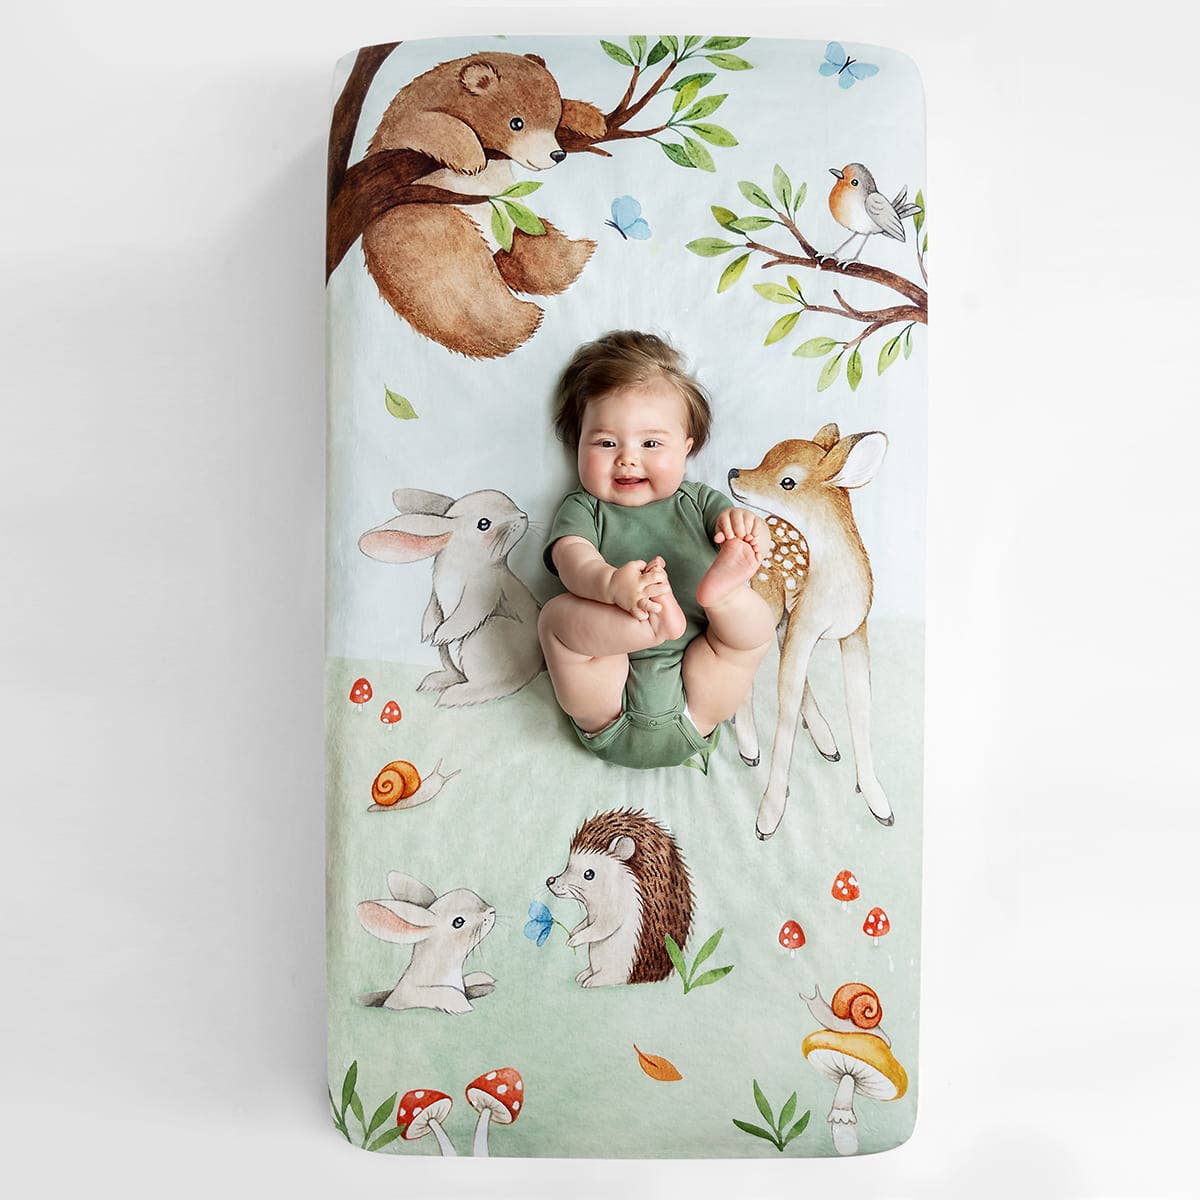 Rookie Humans Cotton Sateen Crib Sheet: Enchanted Forest